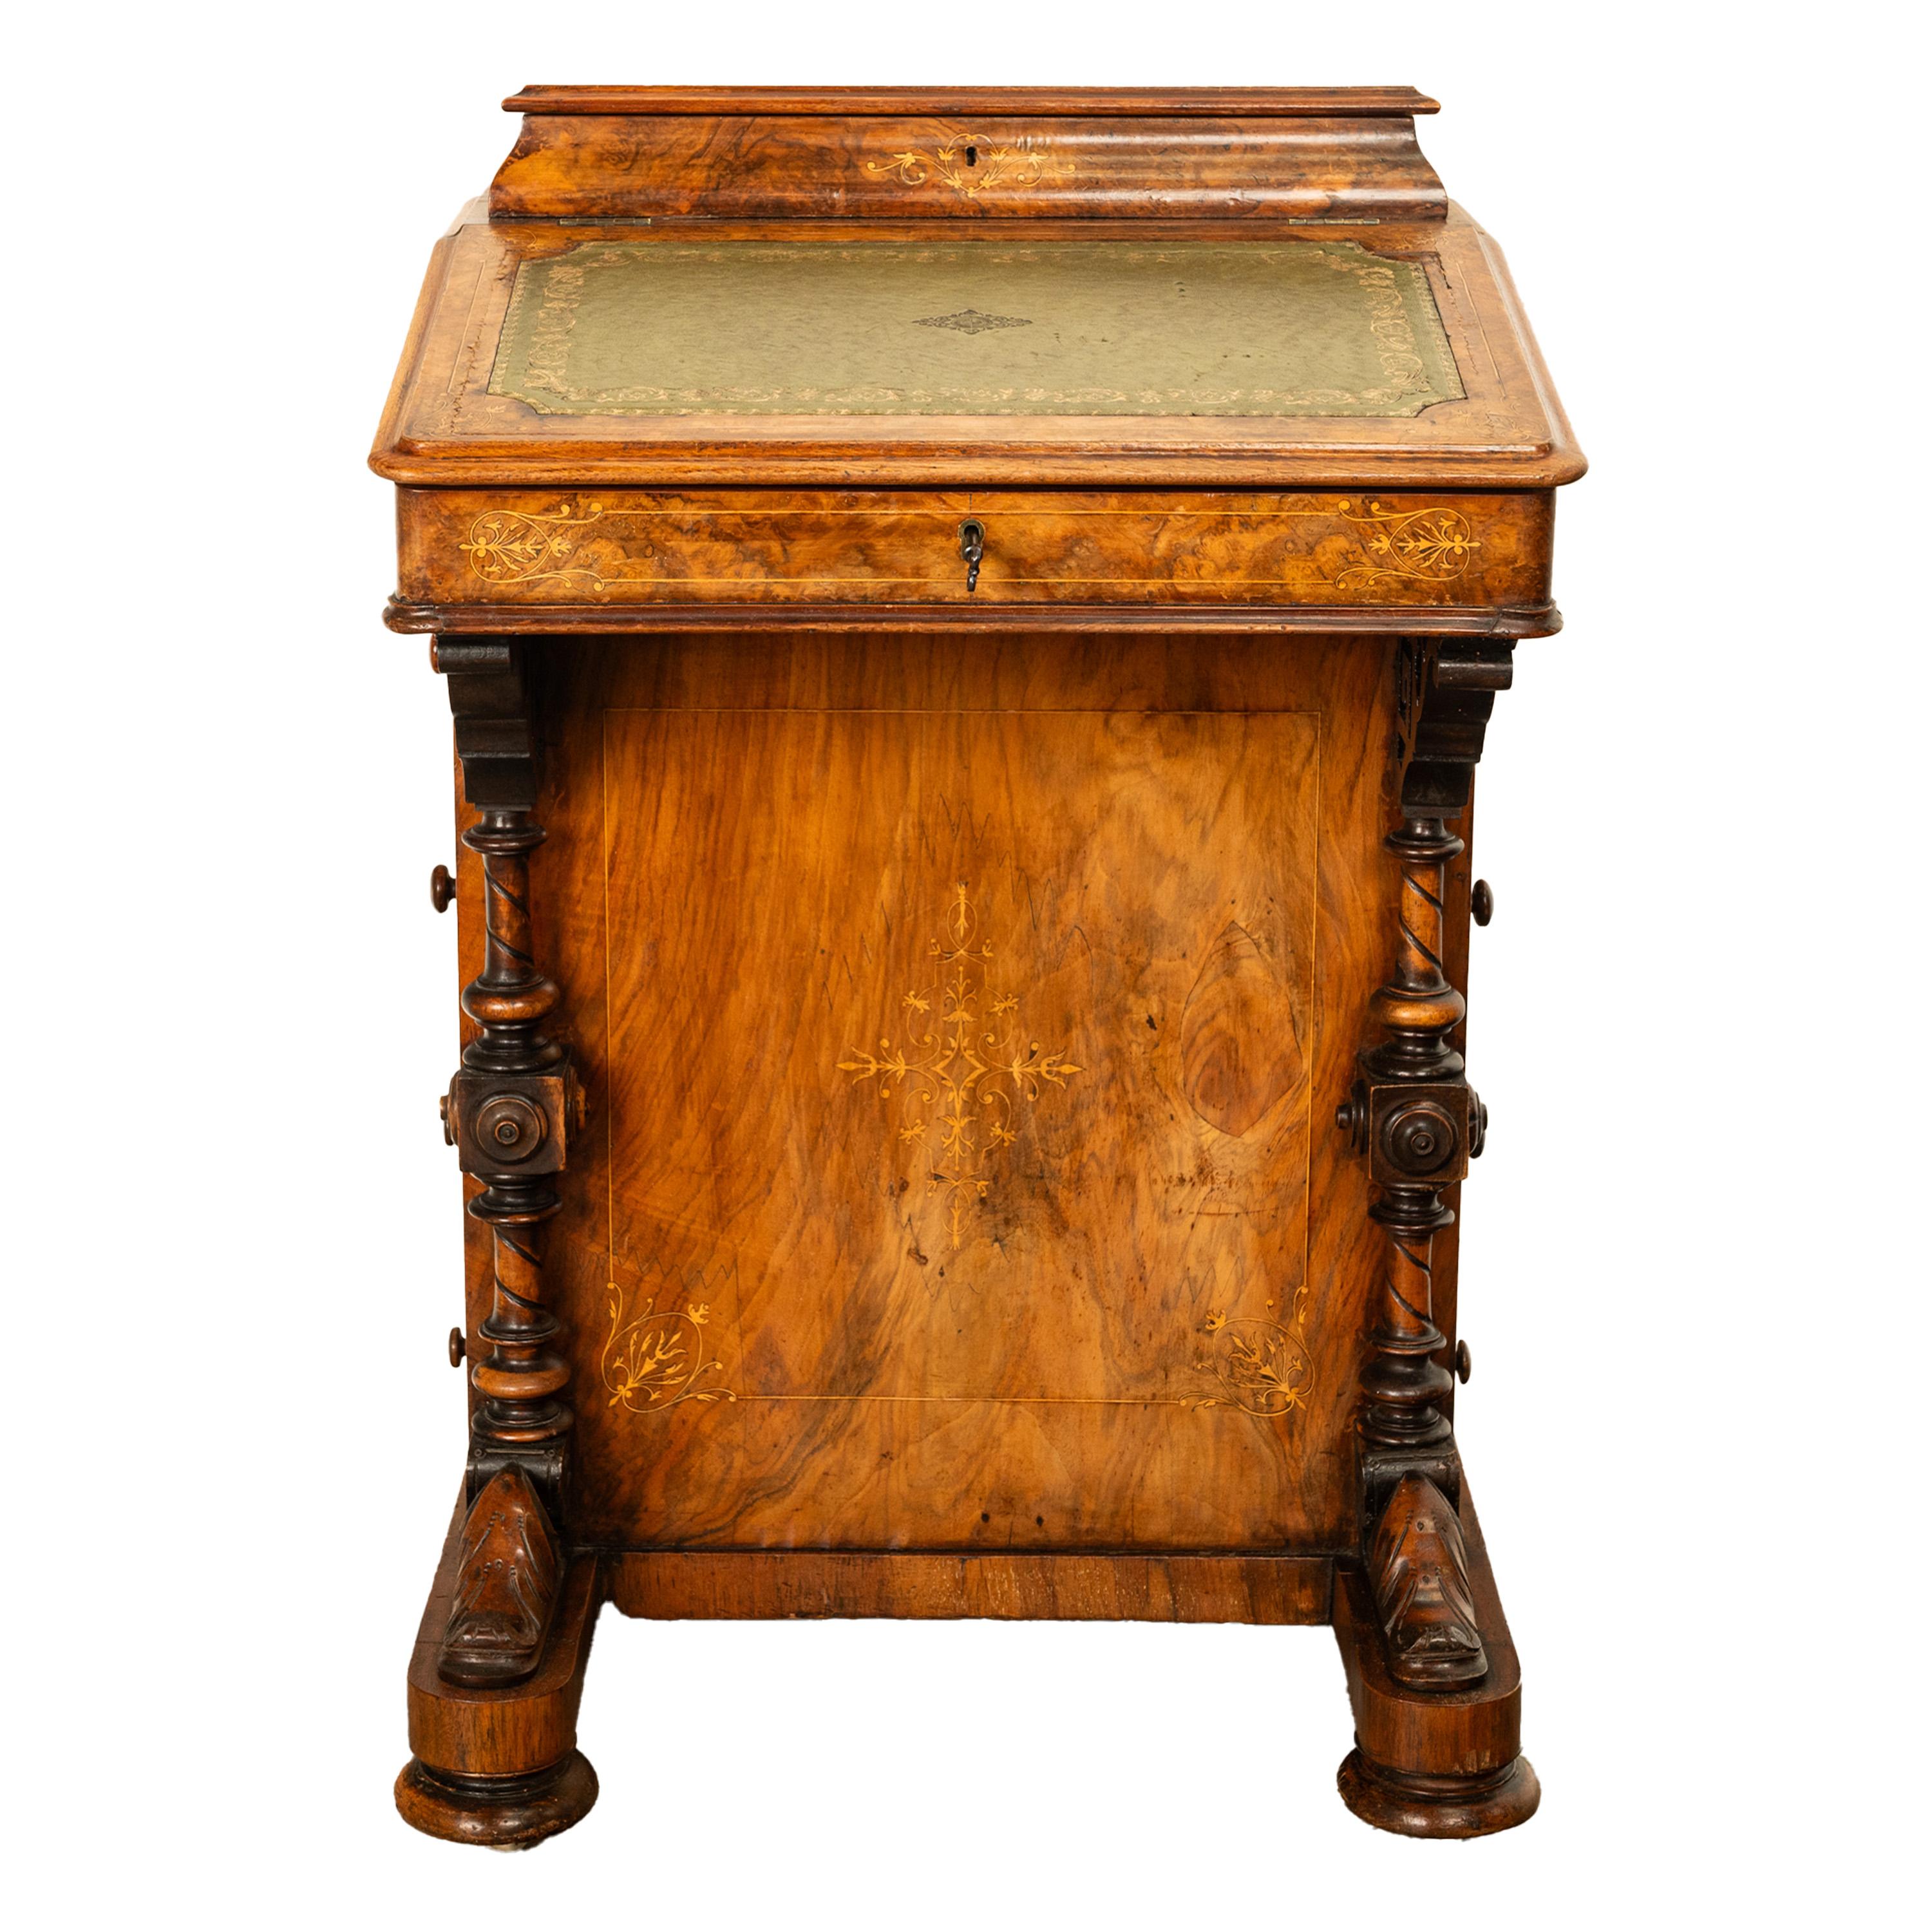 Antique Victorian Burl Walnut Inlaid Marquetry Carved Davenport Desk 1860 In Good Condition For Sale In Portland, OR